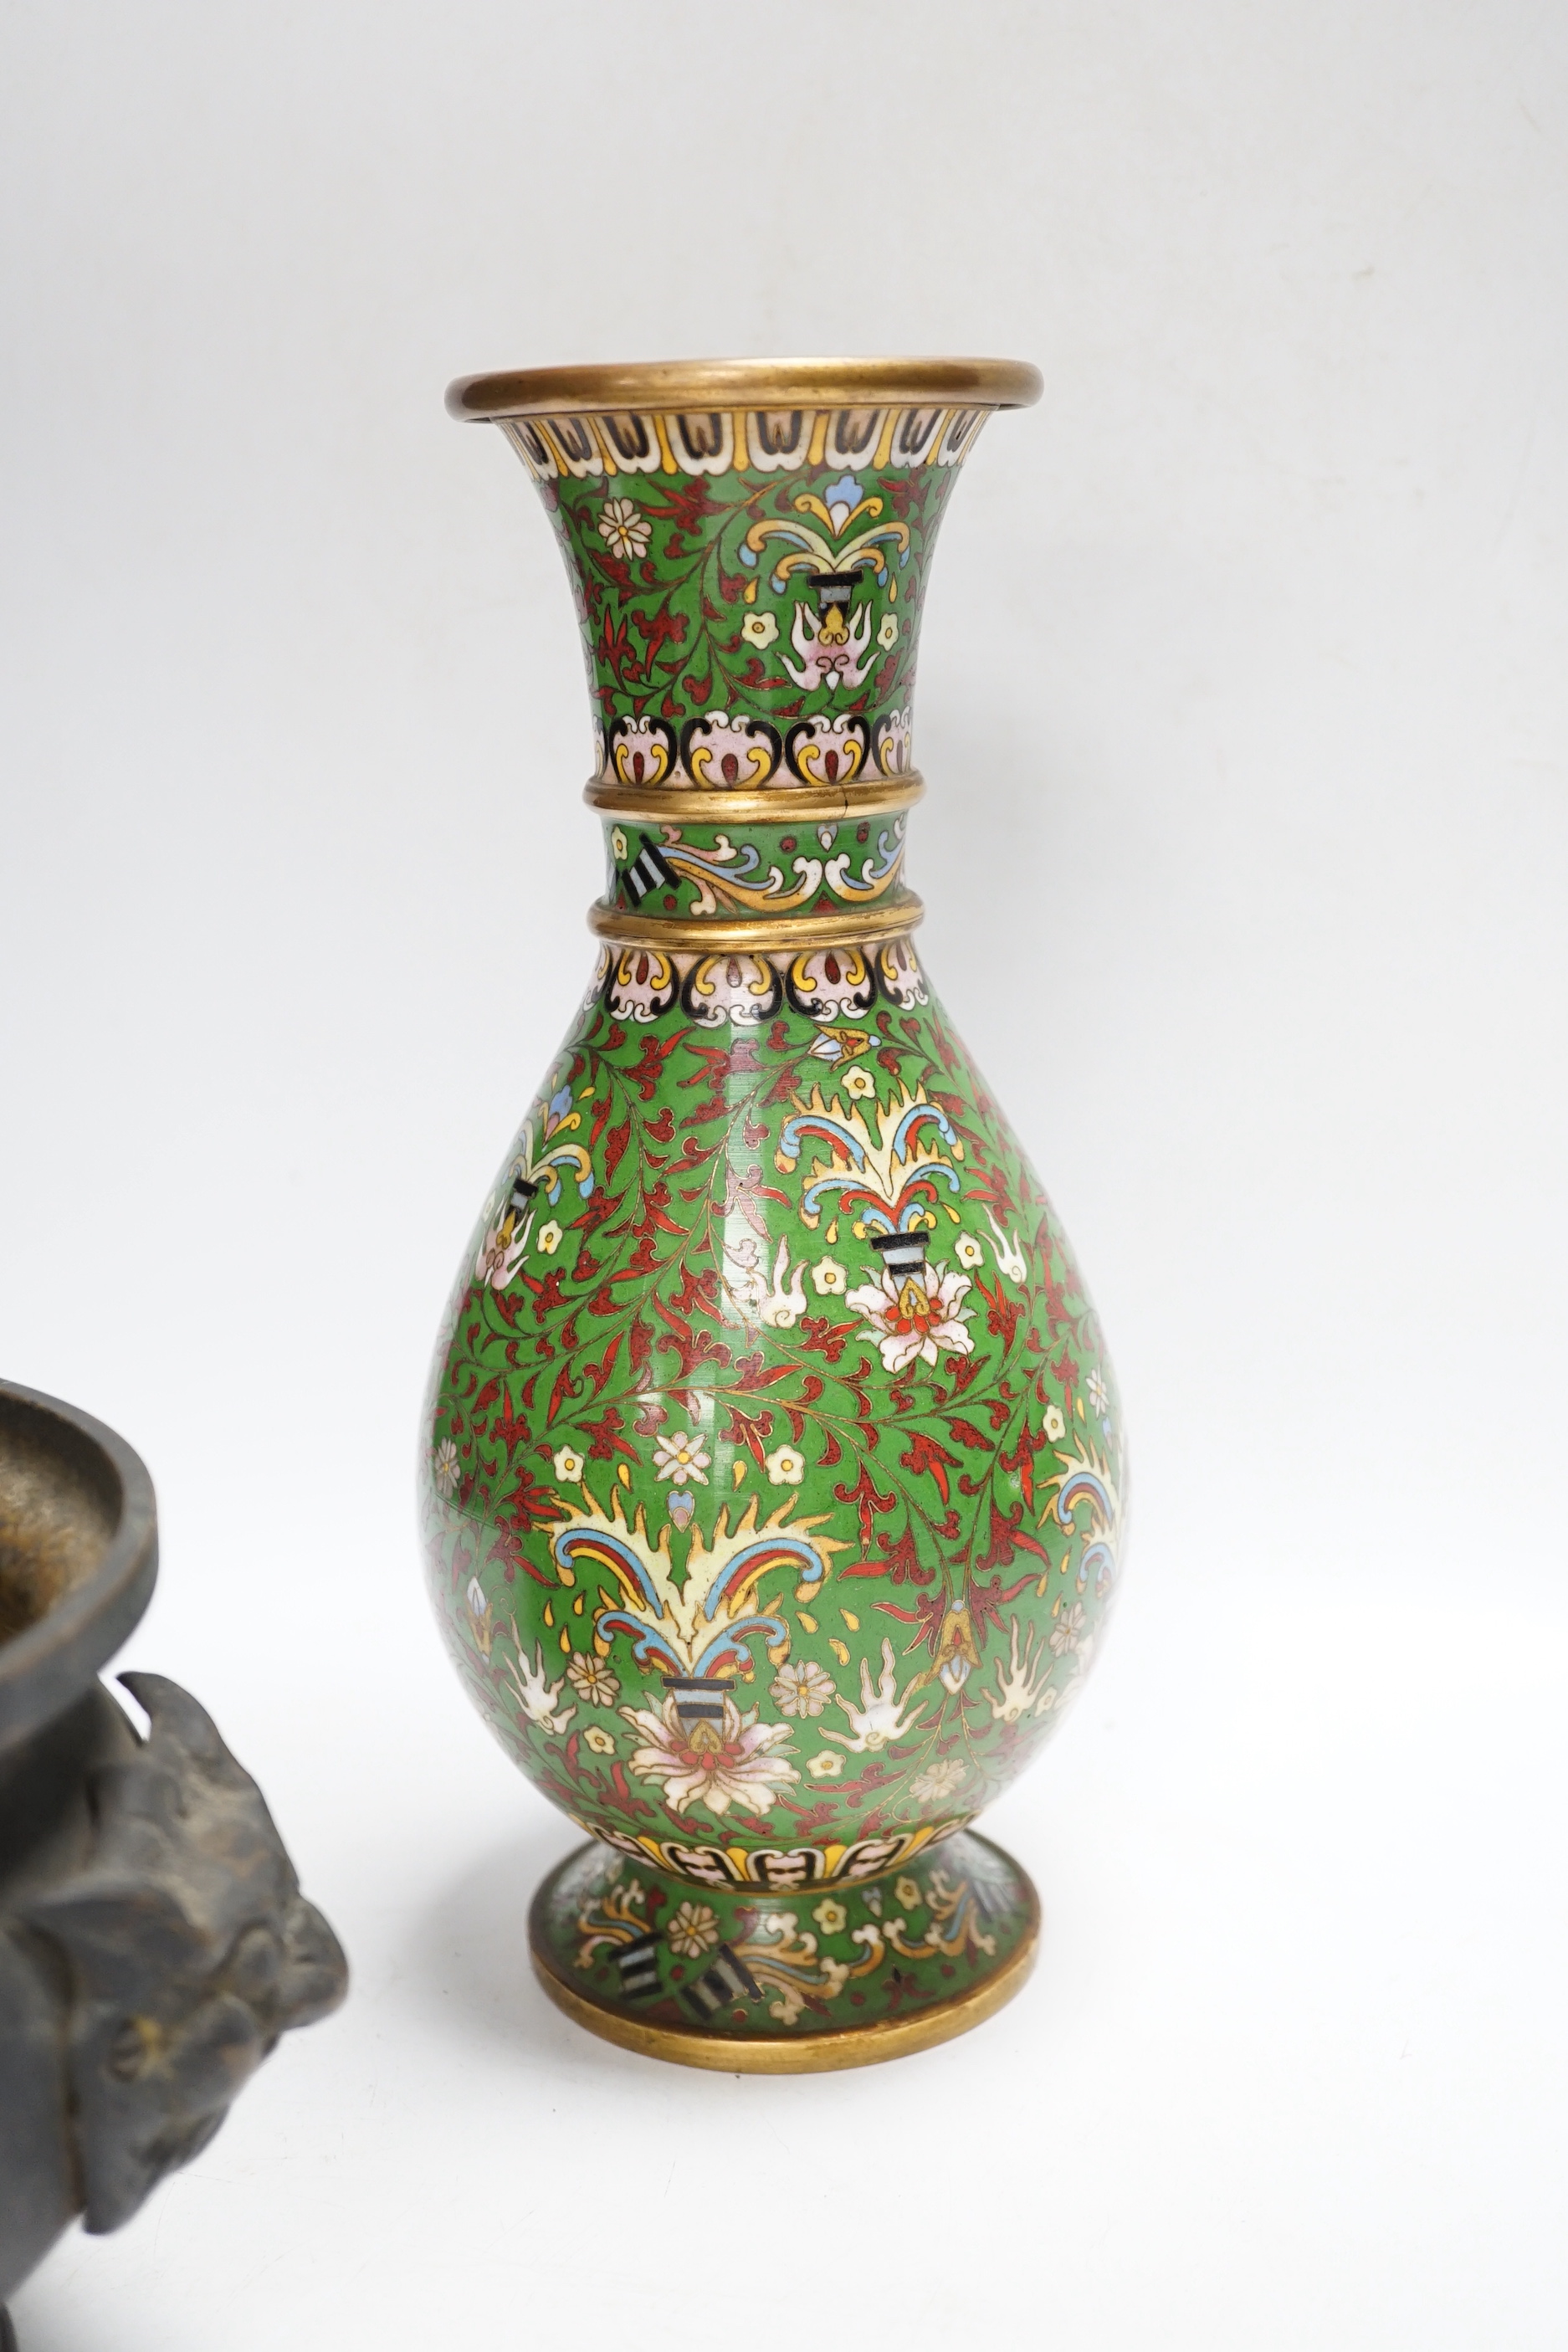 Three Chinese metalware items, a cloisonné vase, an enamel vase, and a brass censor, vase 25.5cm